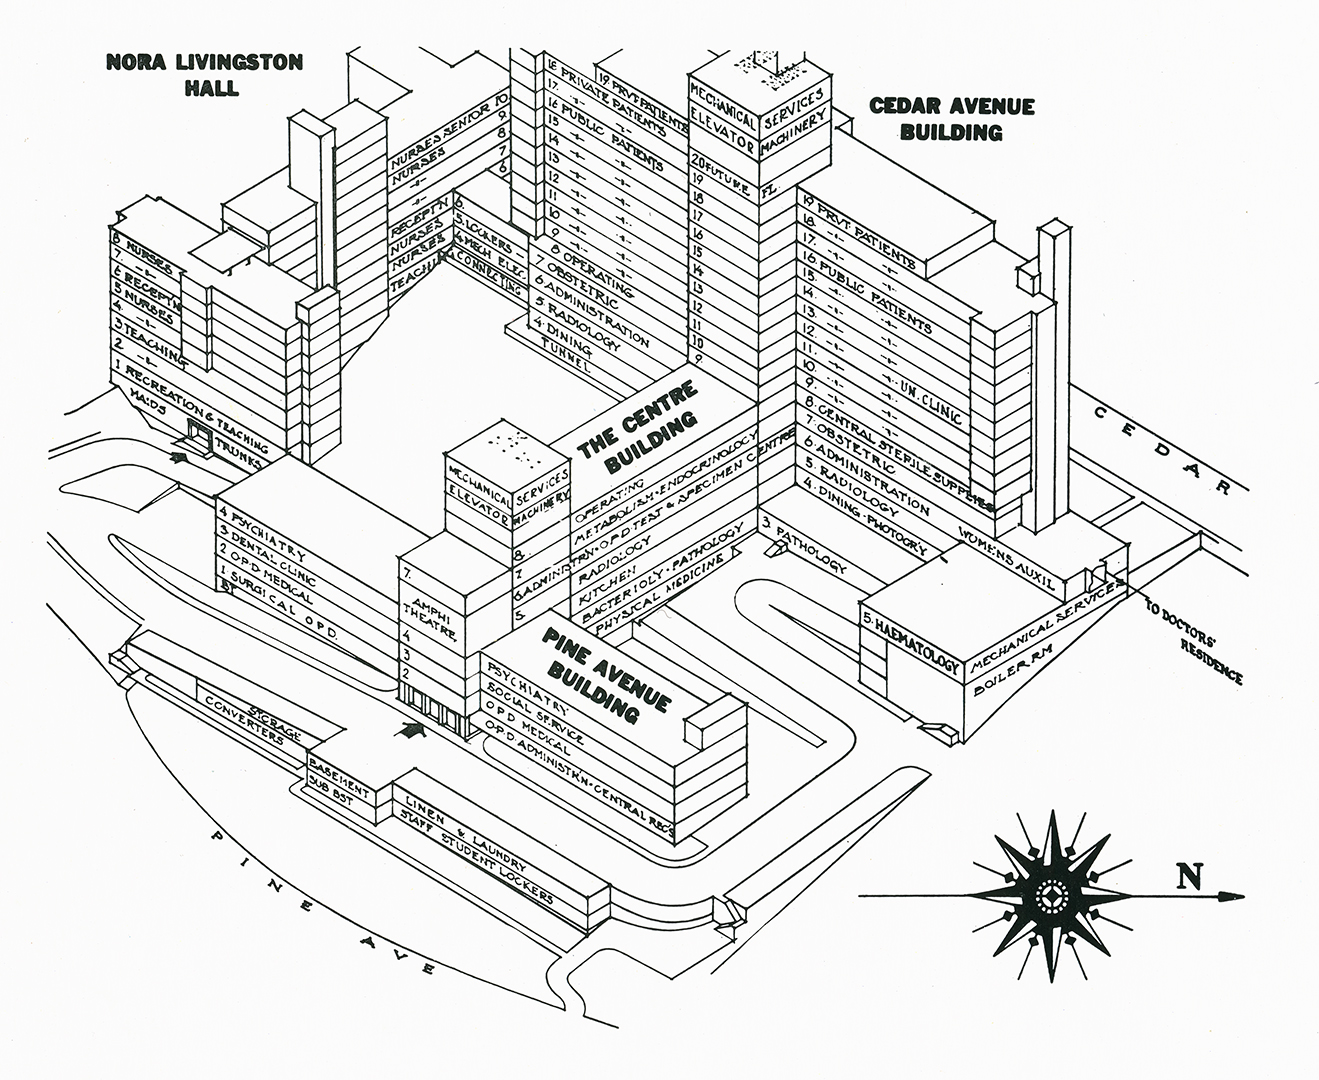 isometric drawing of new hospital showing different departments